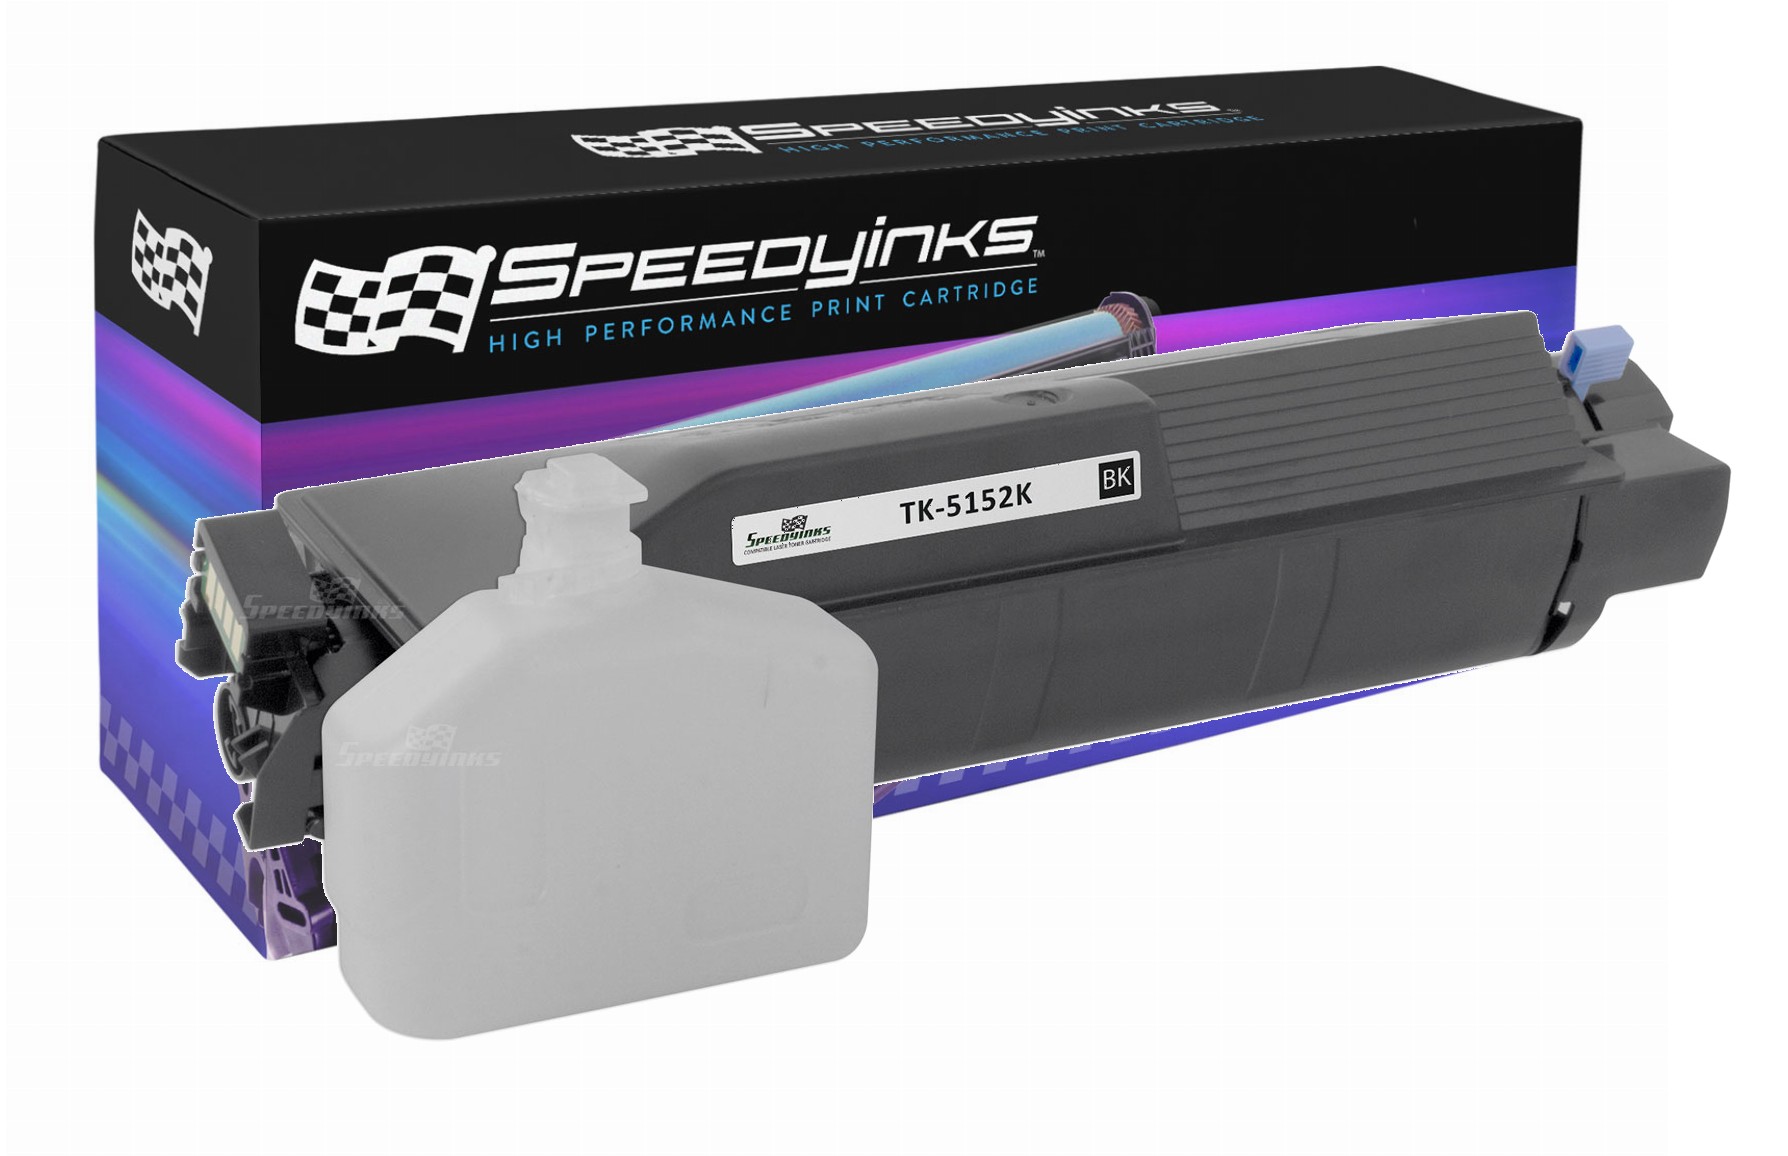 Speedy Compatible Toner Cartridge Replacement for Kyocera TK-5152K / 1T02NS0US0 (Black) - image 1 of 7